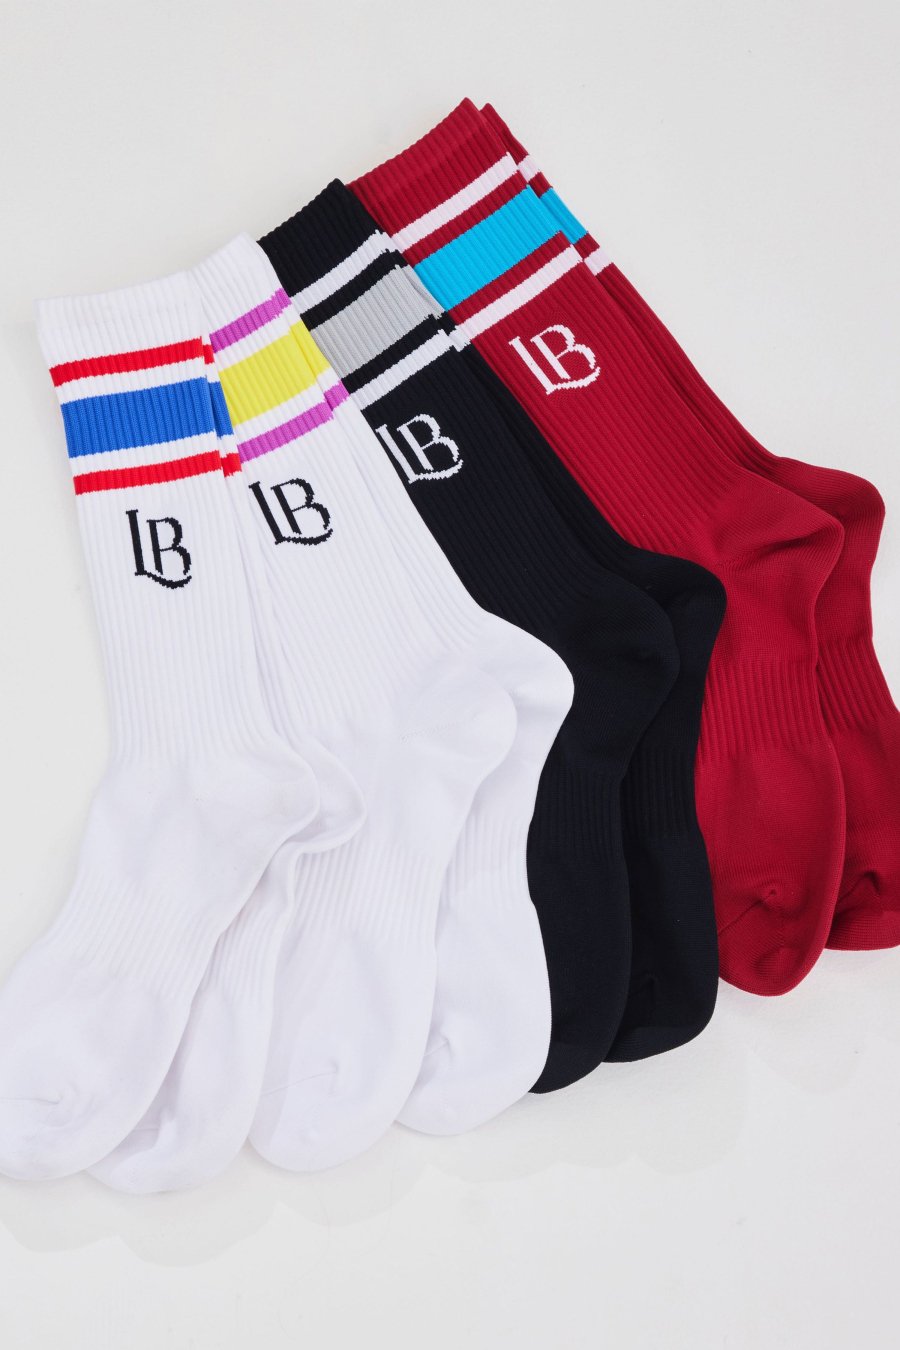 LITTLEBIG  23ss Socks( Union or Black or Bordeaux )<img class='new_mark_img2' src='https://img.shop-pro.jp/img/new/icons15.gif' style='border:none;display:inline;margin:0px;padding:0px;width:auto;' />